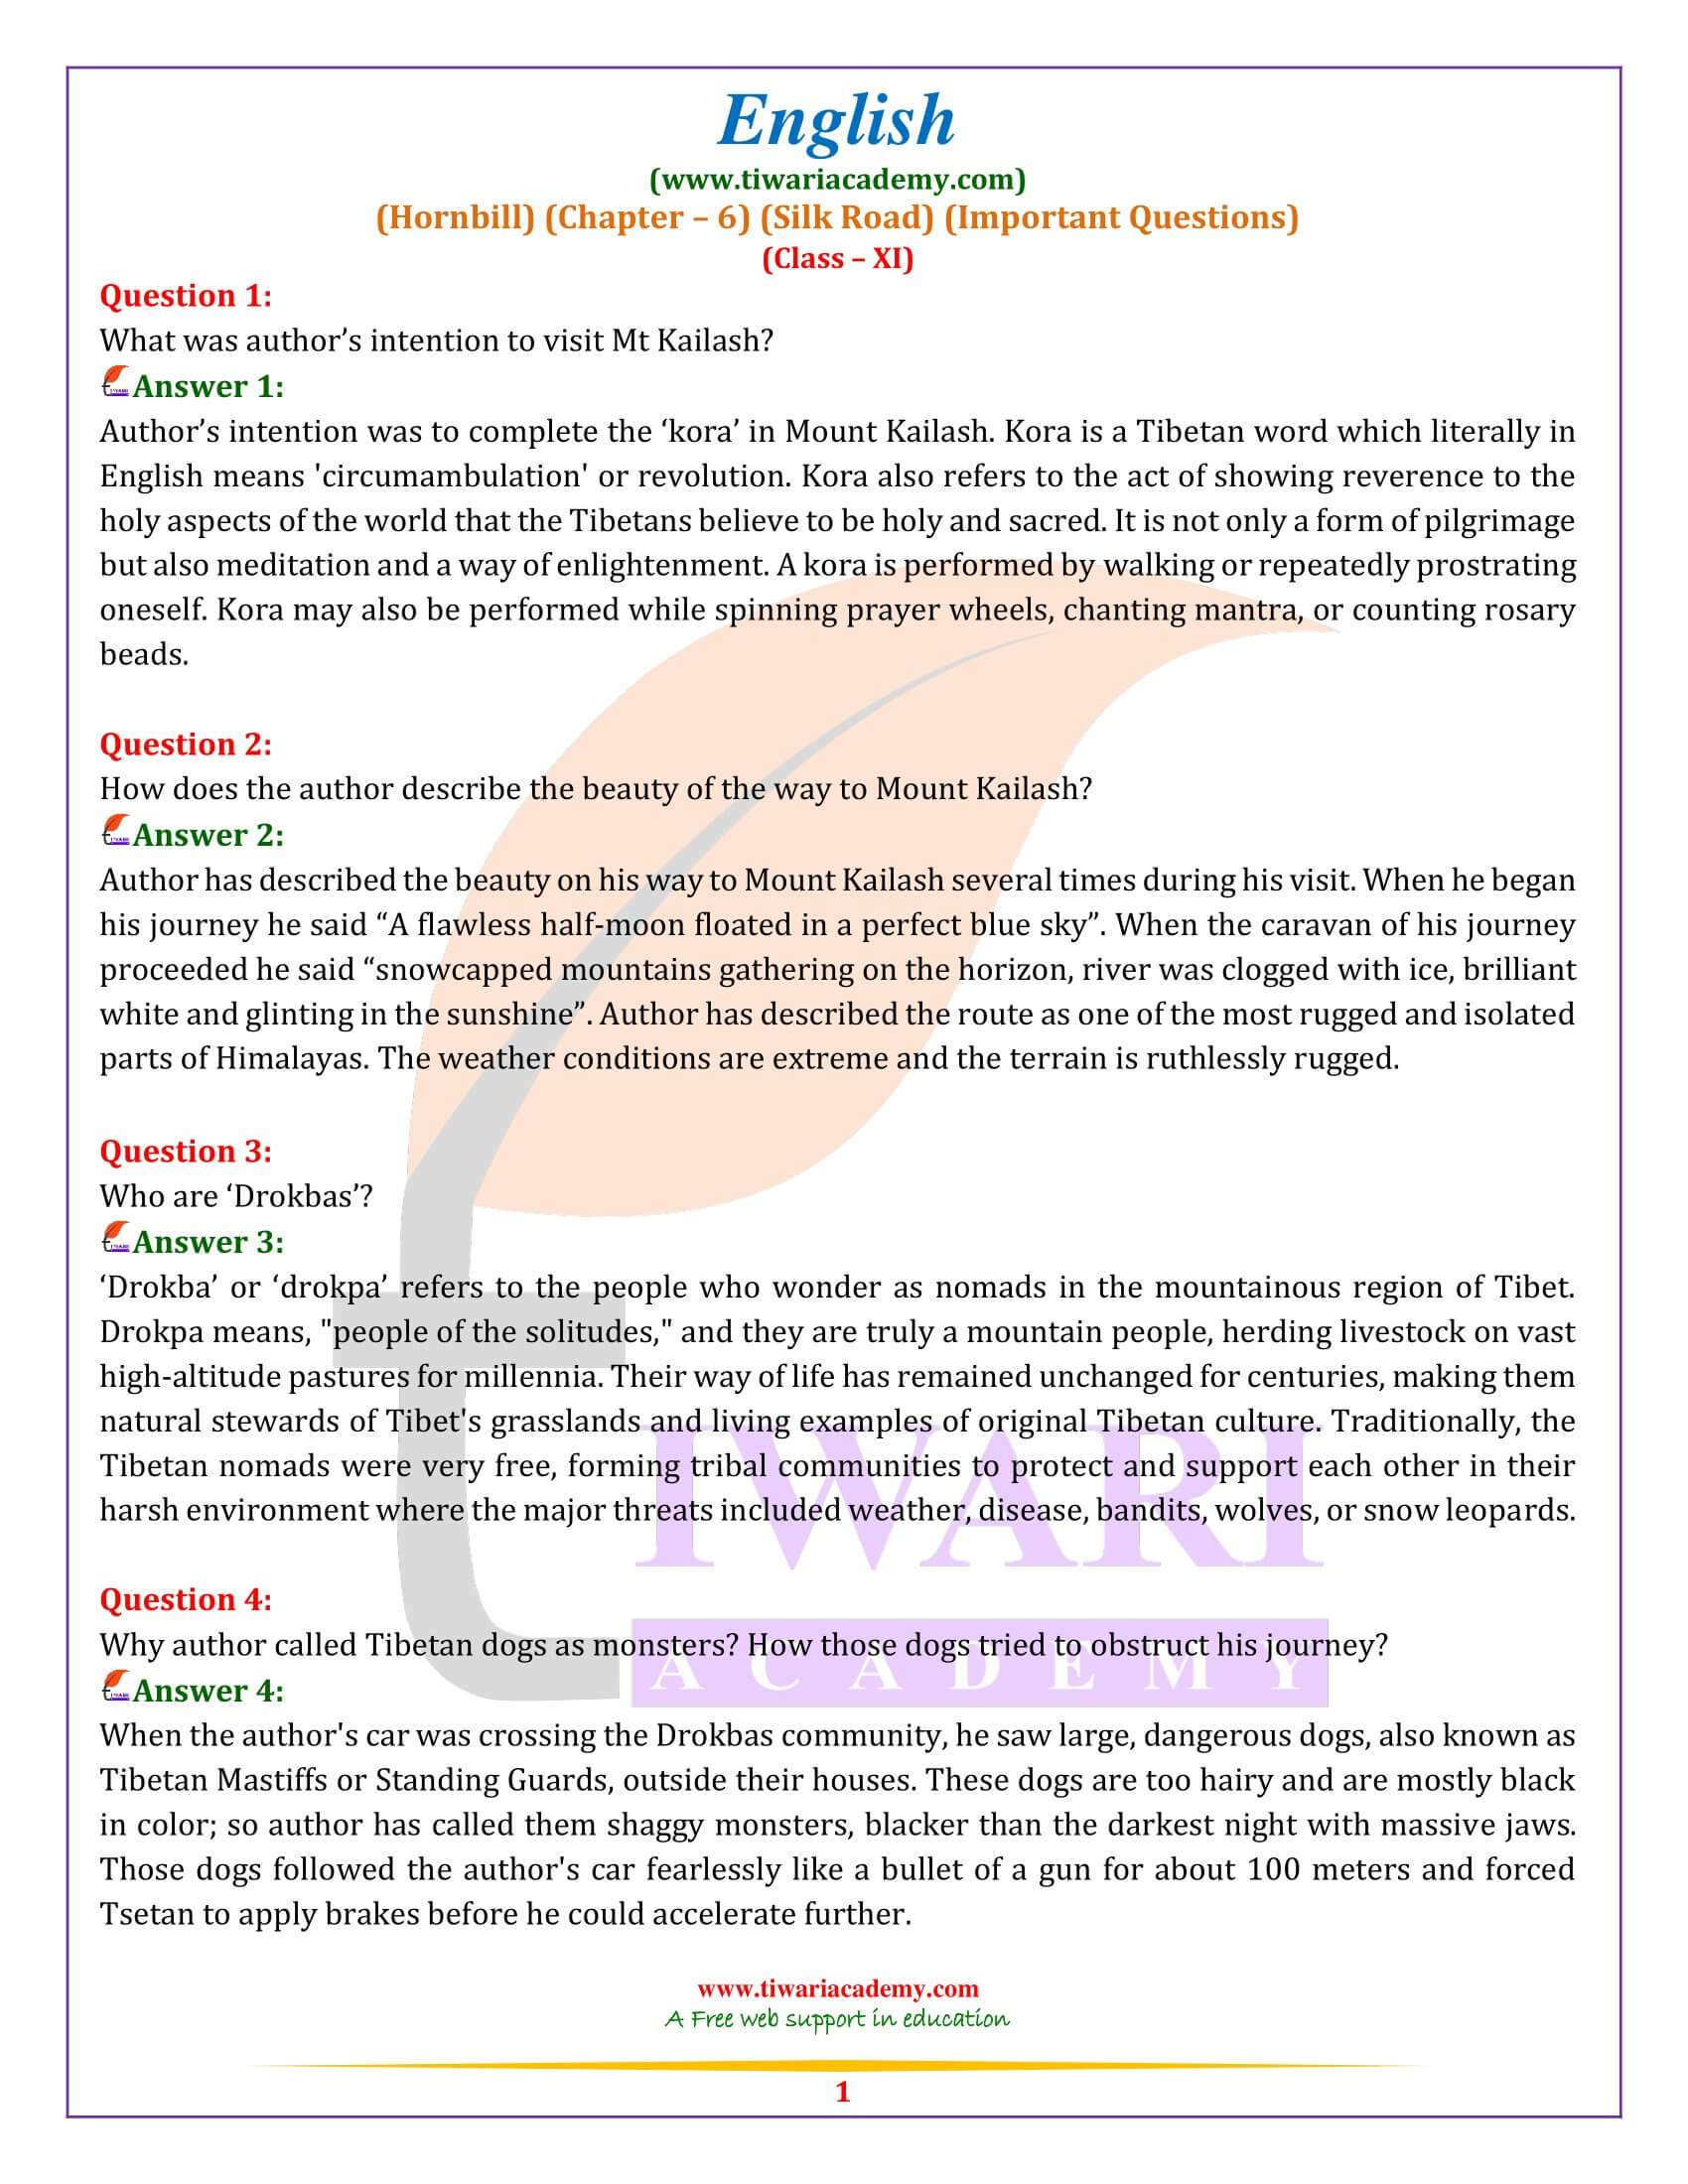 Class 11 English Hornbill Chapter 6 Important Questions